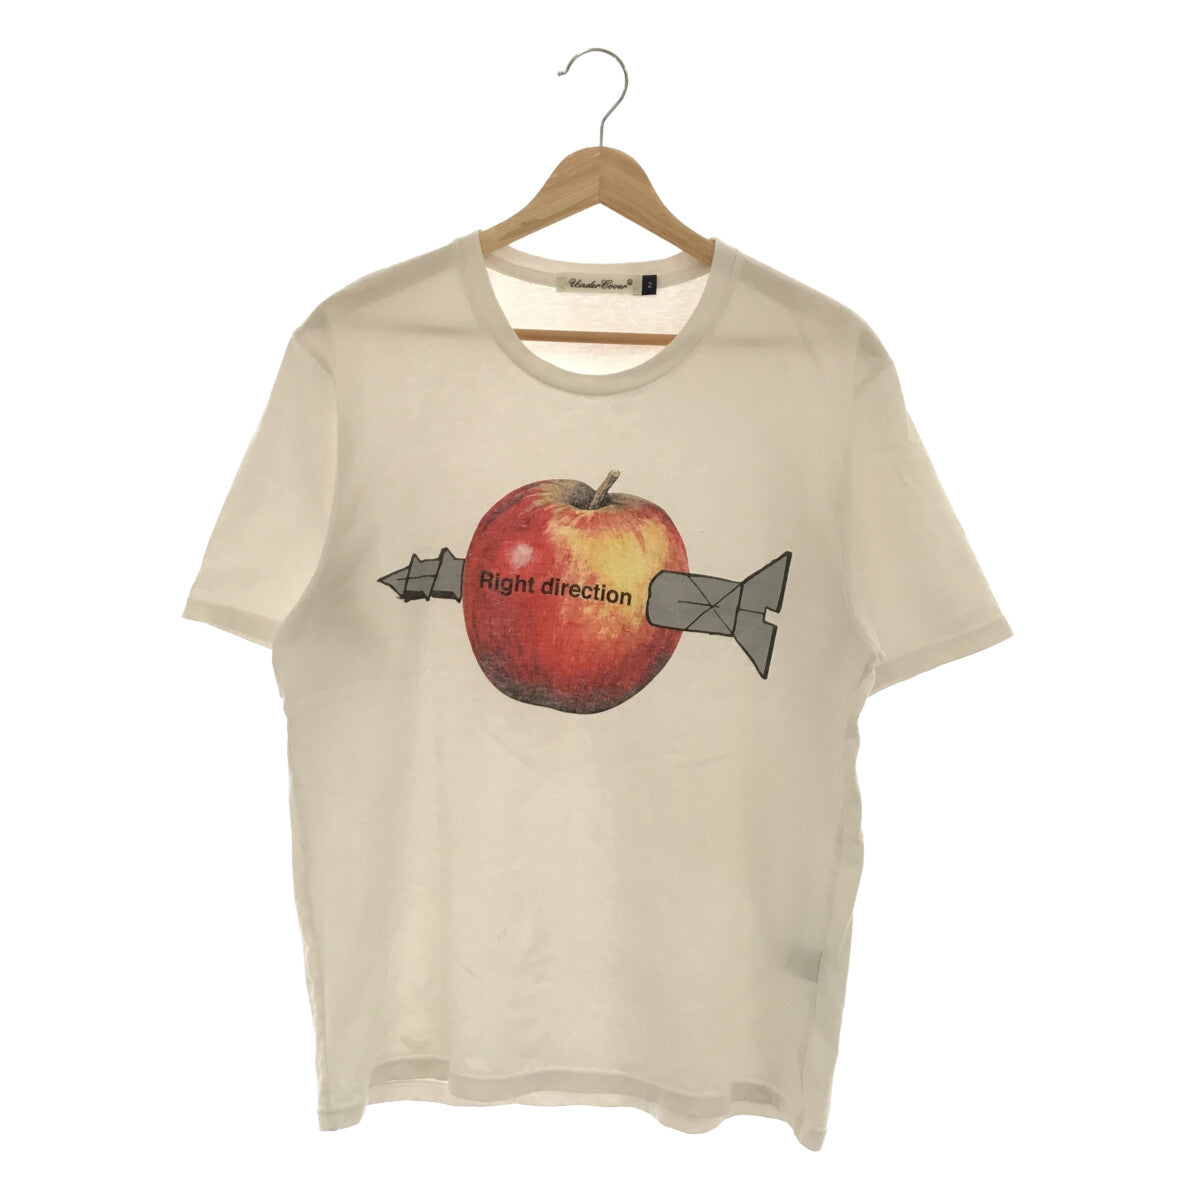 UNDER COVER / アンダーカバー | Right direction Apple Tee